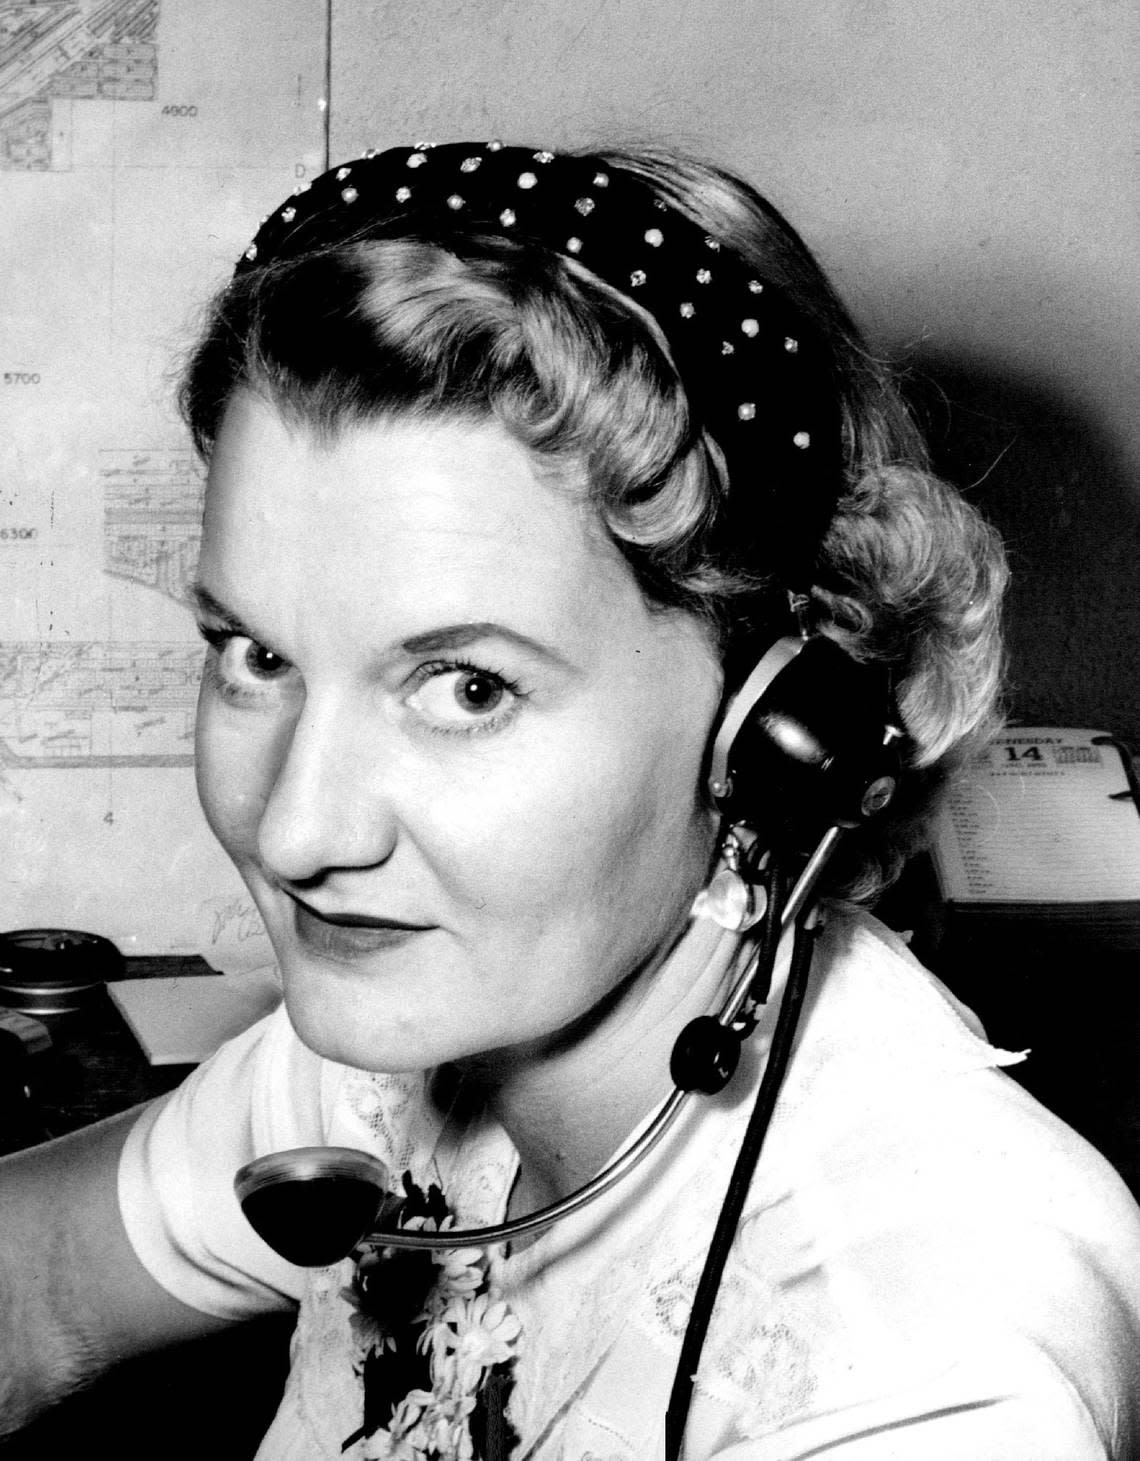 Thelma Nauman, a switchboard operator at Coral Gables City Hall in 1955, shows off a new and more comfortable headpiece.